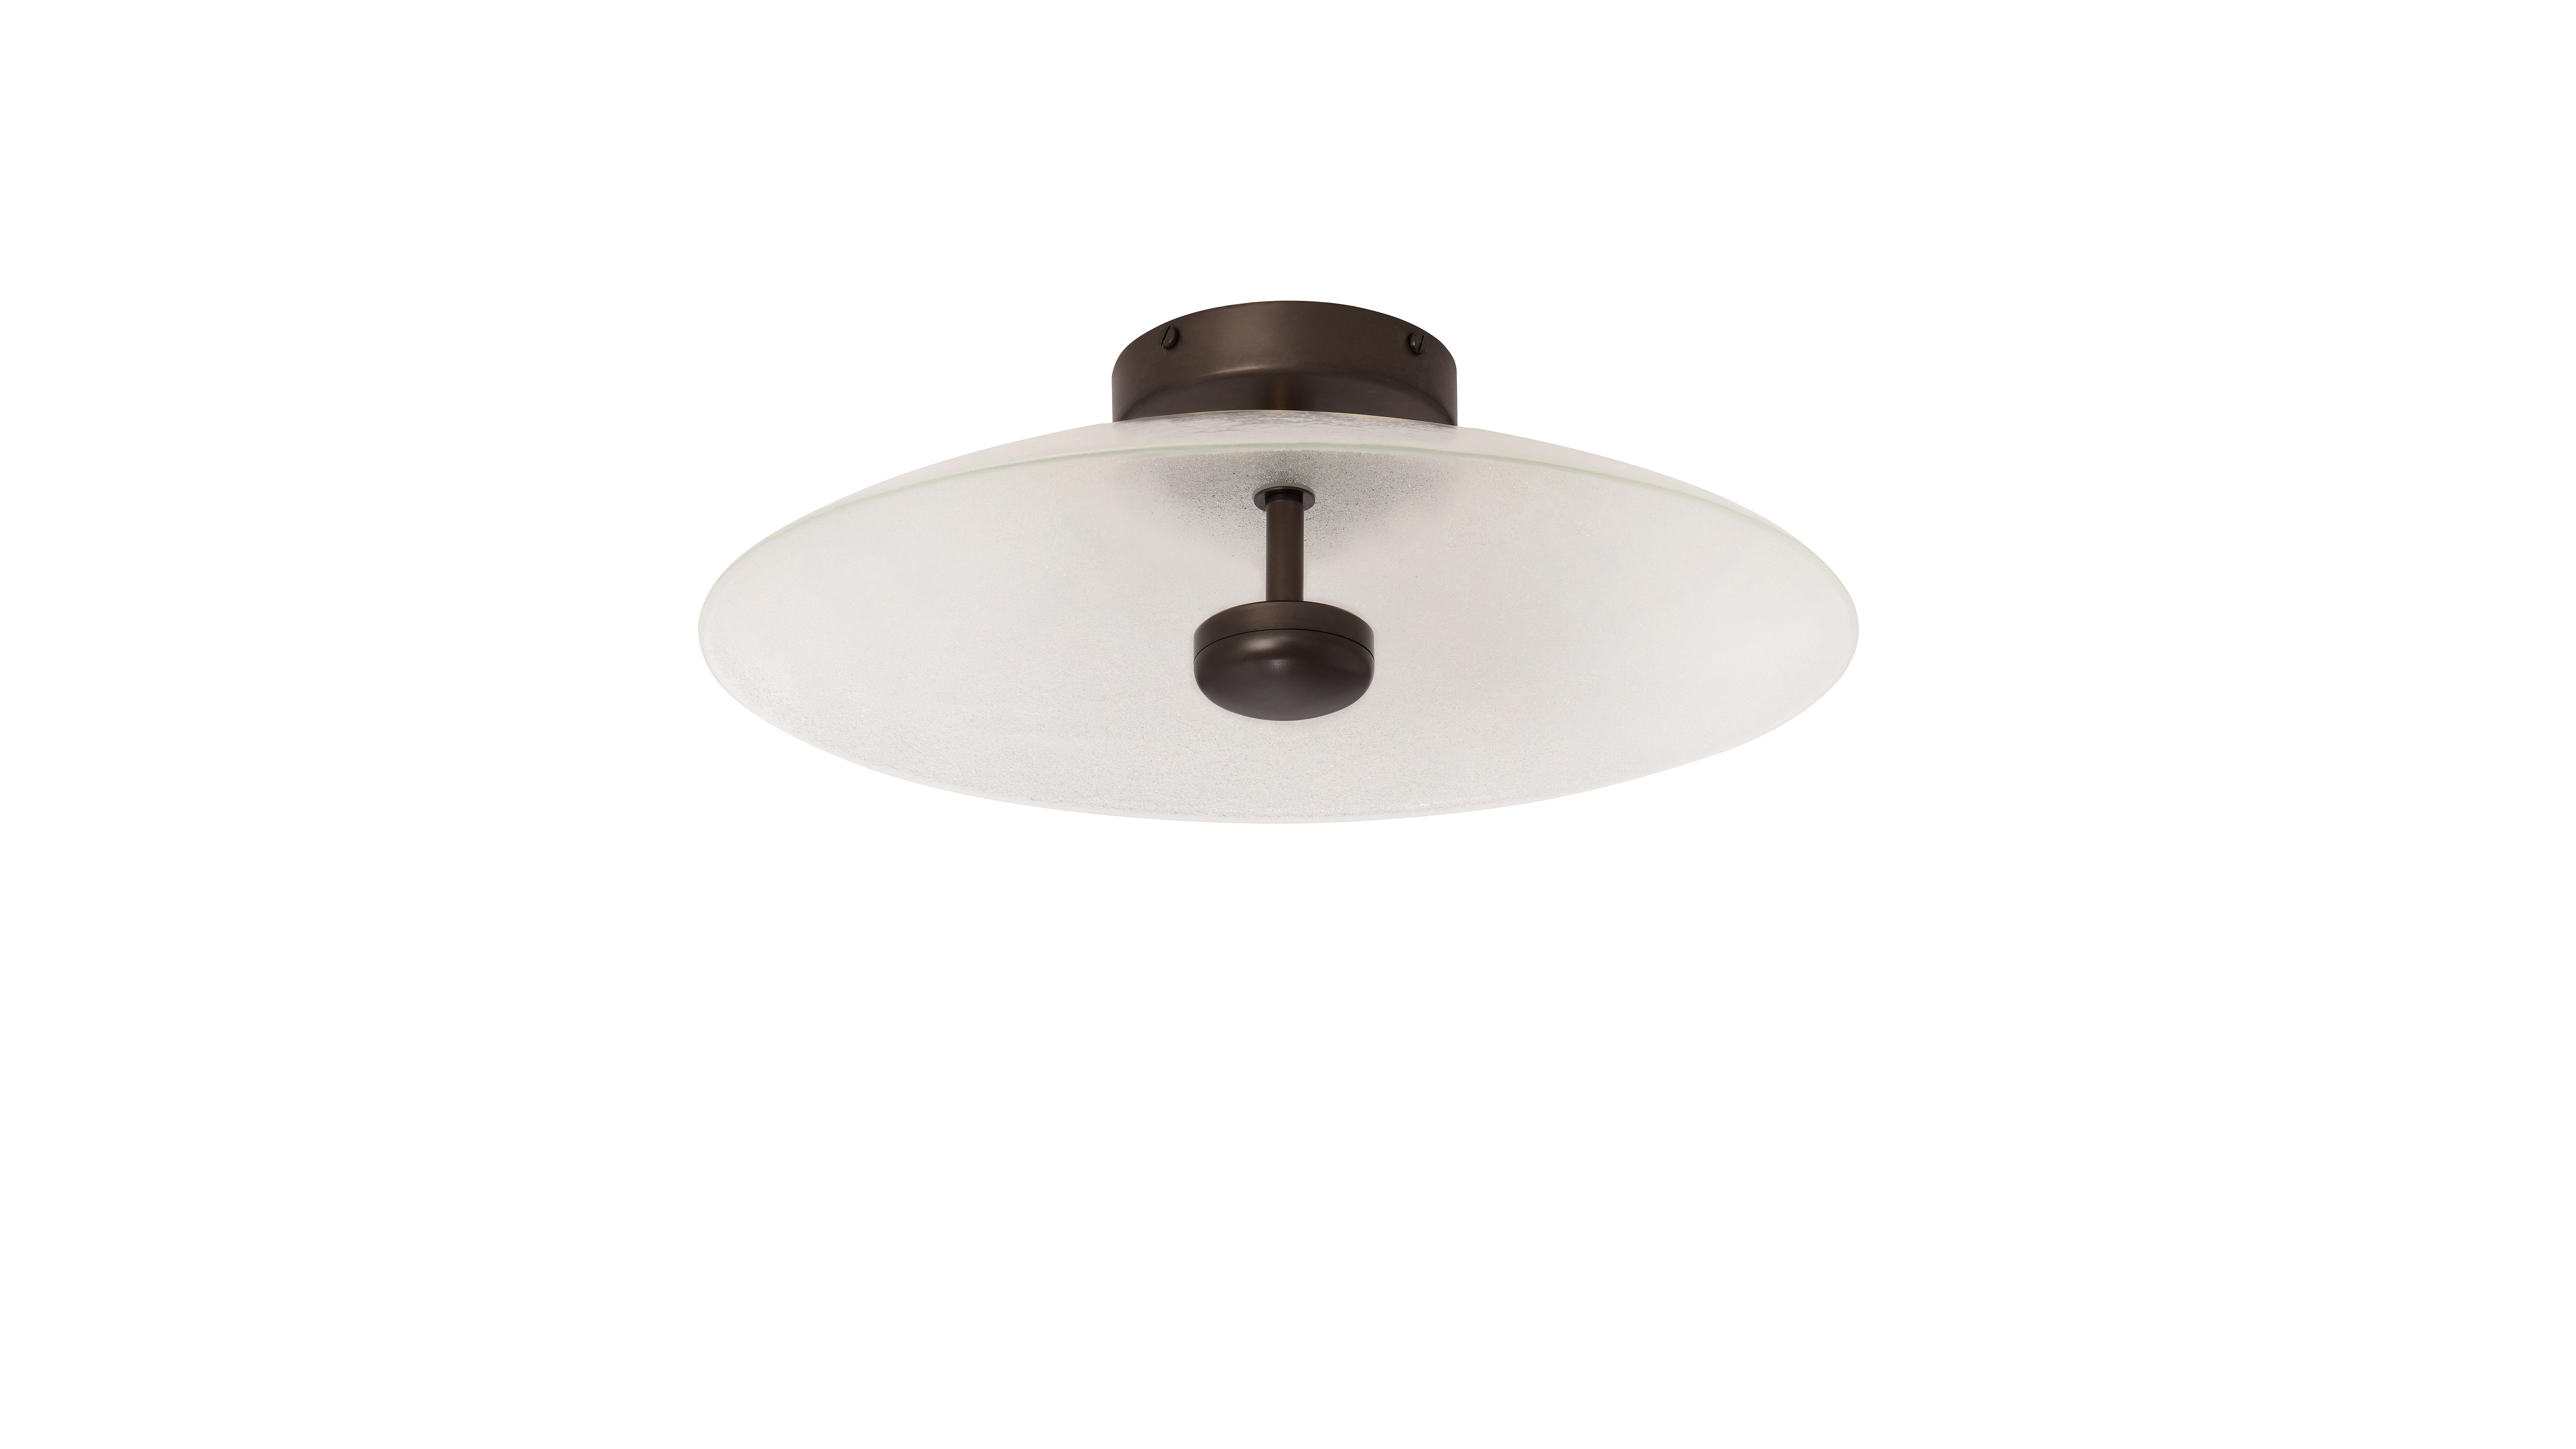 Bronze Cielo large ceiling lamp by CTO Lighting
Materials: Bronze with hand fritted glass
Dimensions: W 38.5 x D 38.5 x H 13 cm

Integrated LED - trailing dimmable - 8w - 2700k 
Weight 4.5kg (9.9lbs)
Mounts onto 4” junction box

All our lamps can be